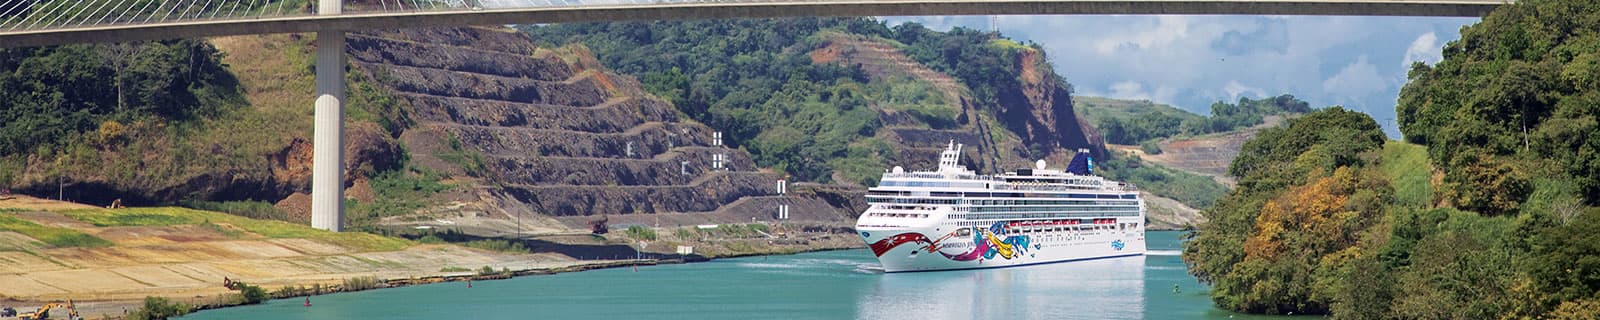 best cruise line panama canal